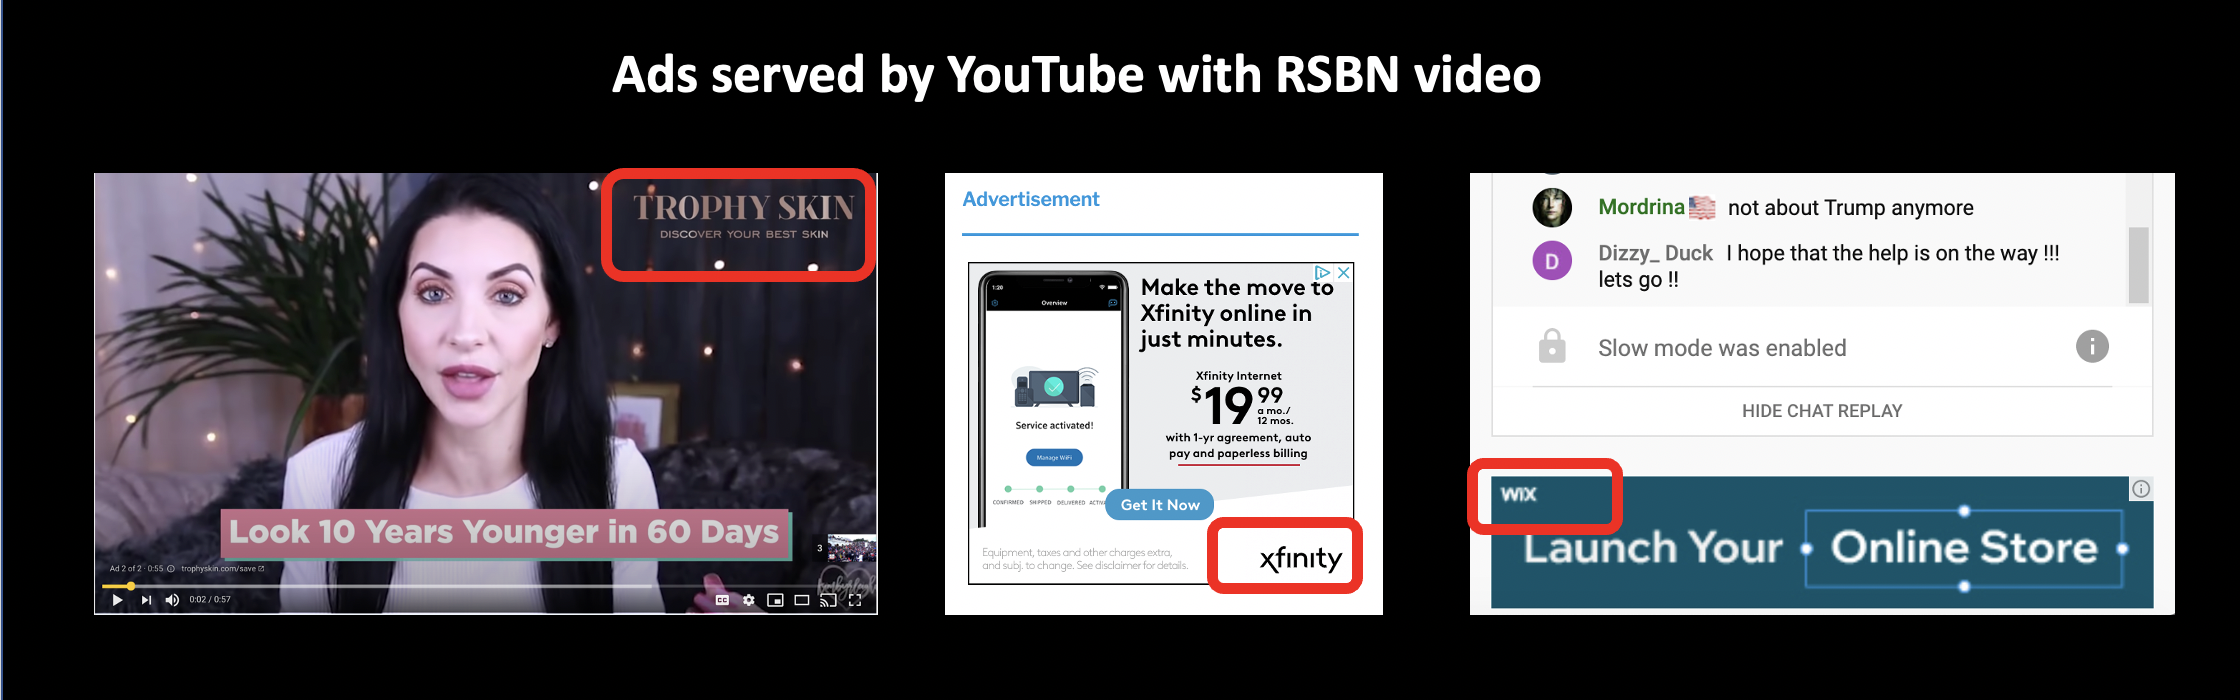 Advertisers need to make sure that YouTube shows ads with videos that align with their values.